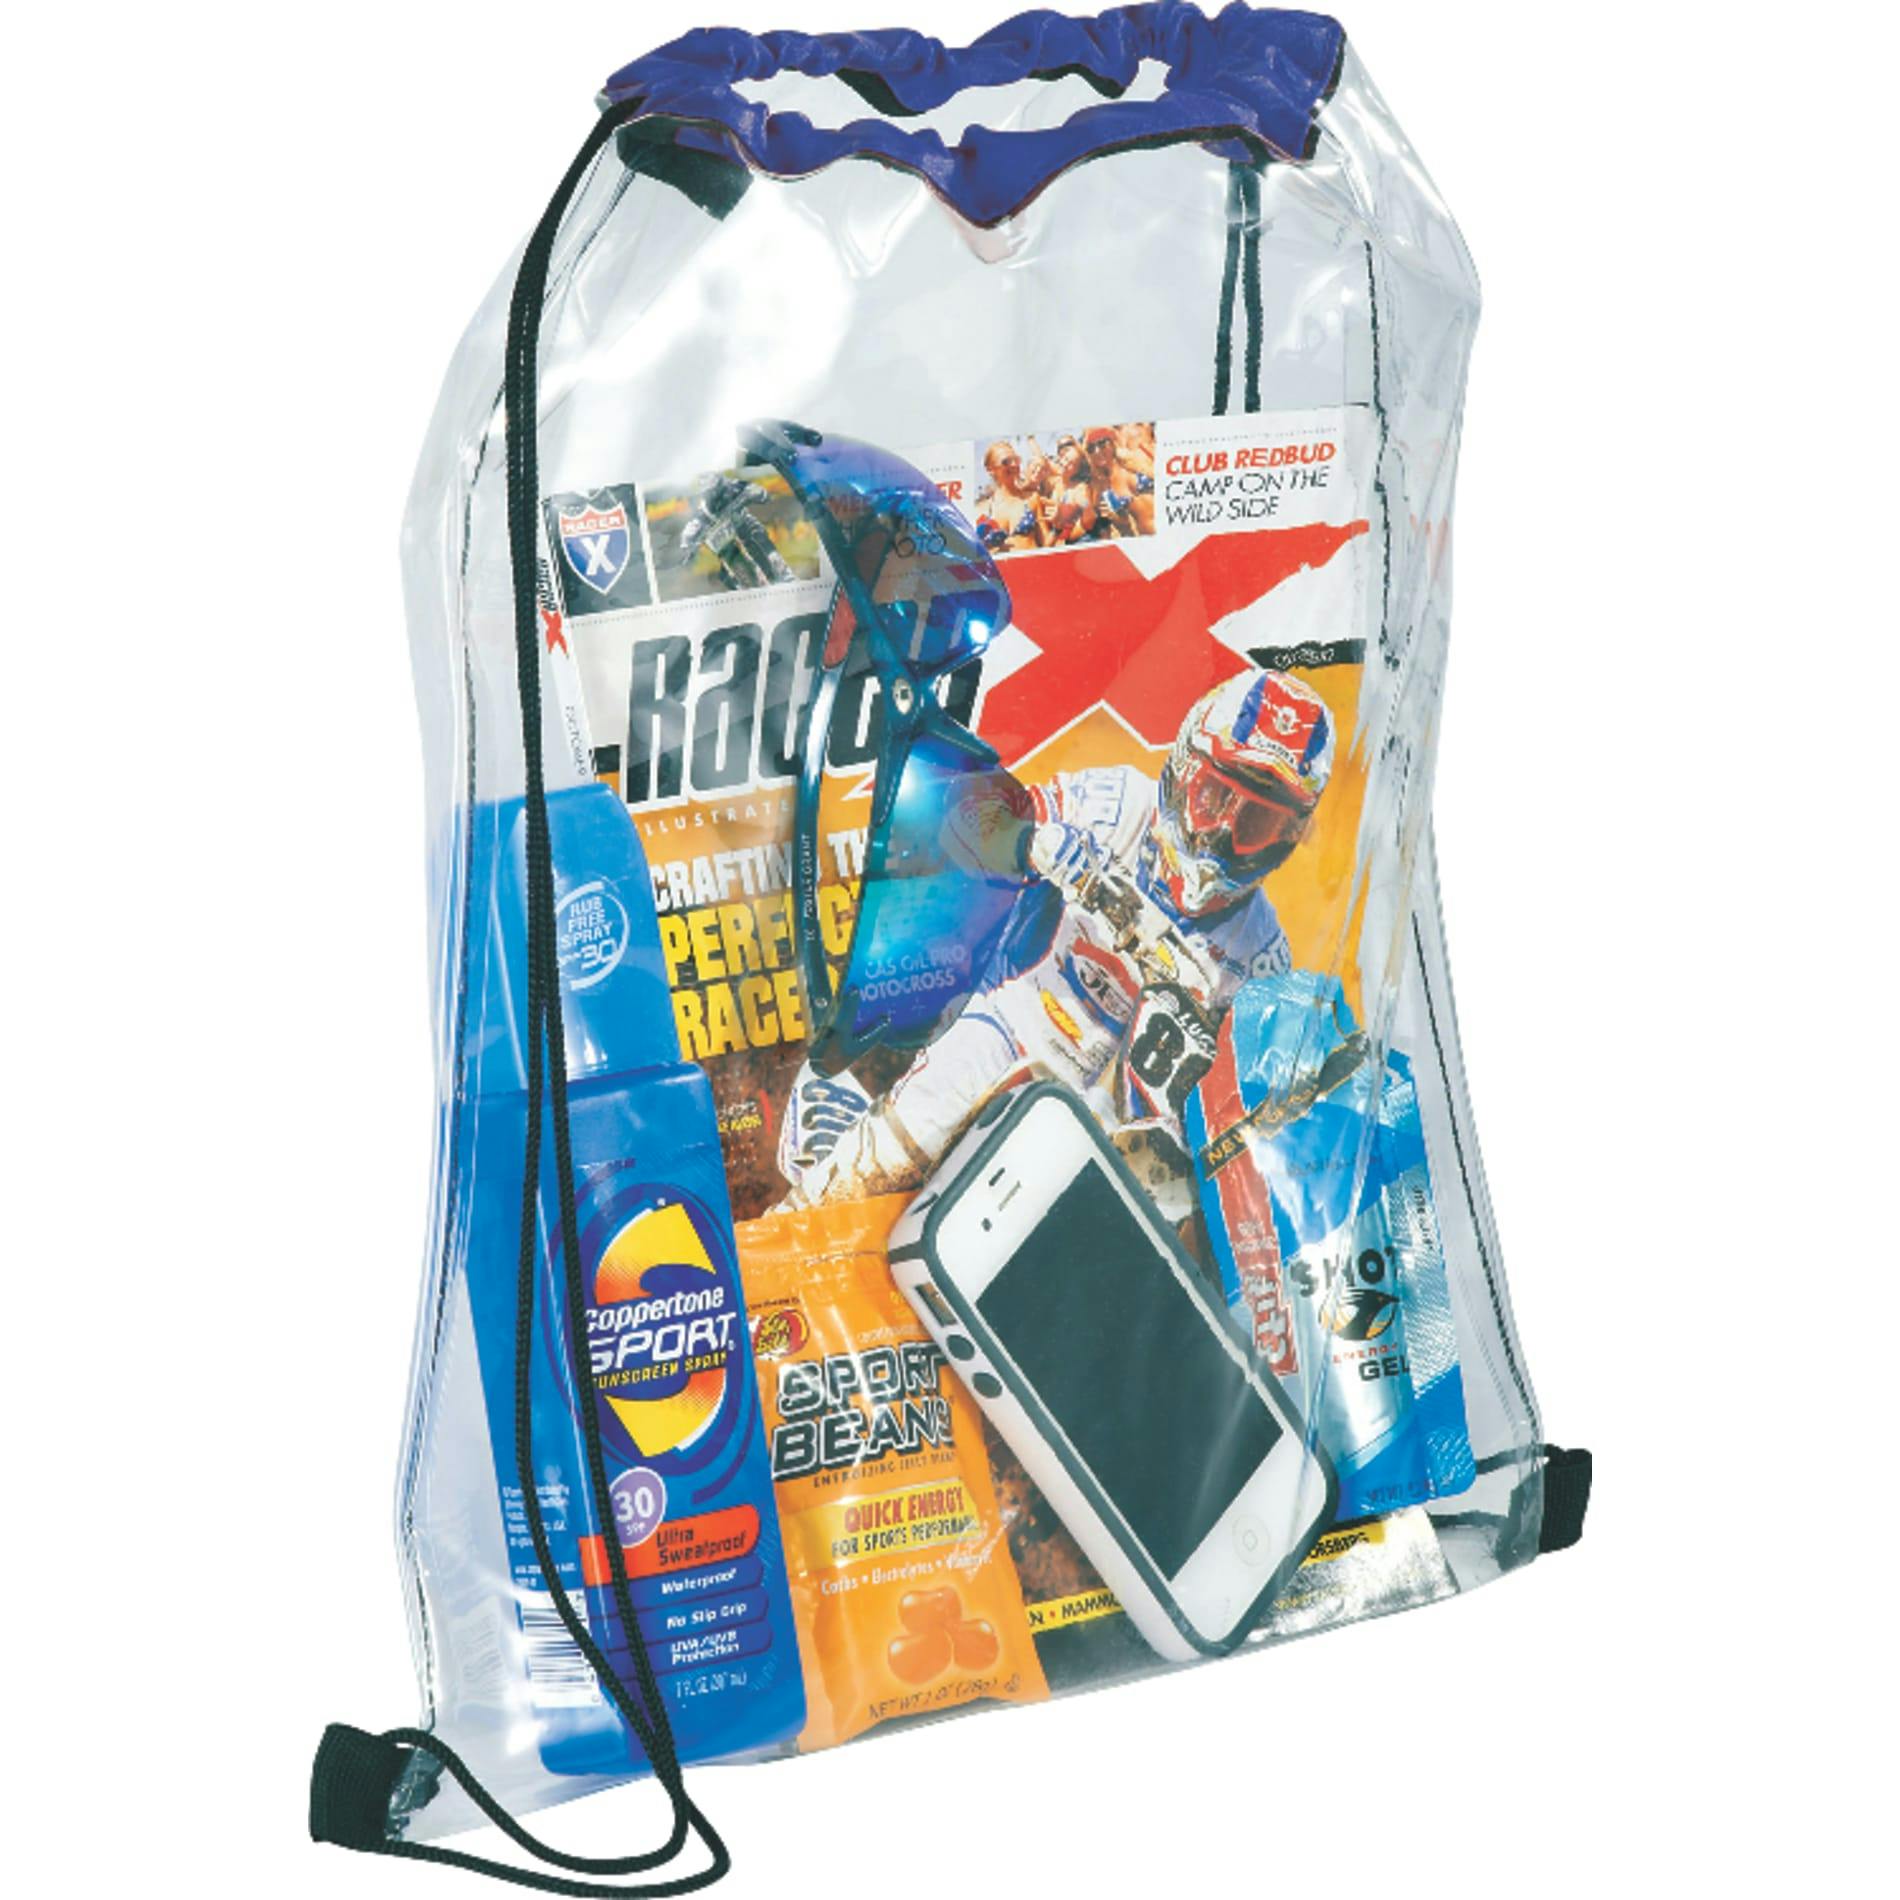 Rally Clear Drawstring Bag - additional Image 1